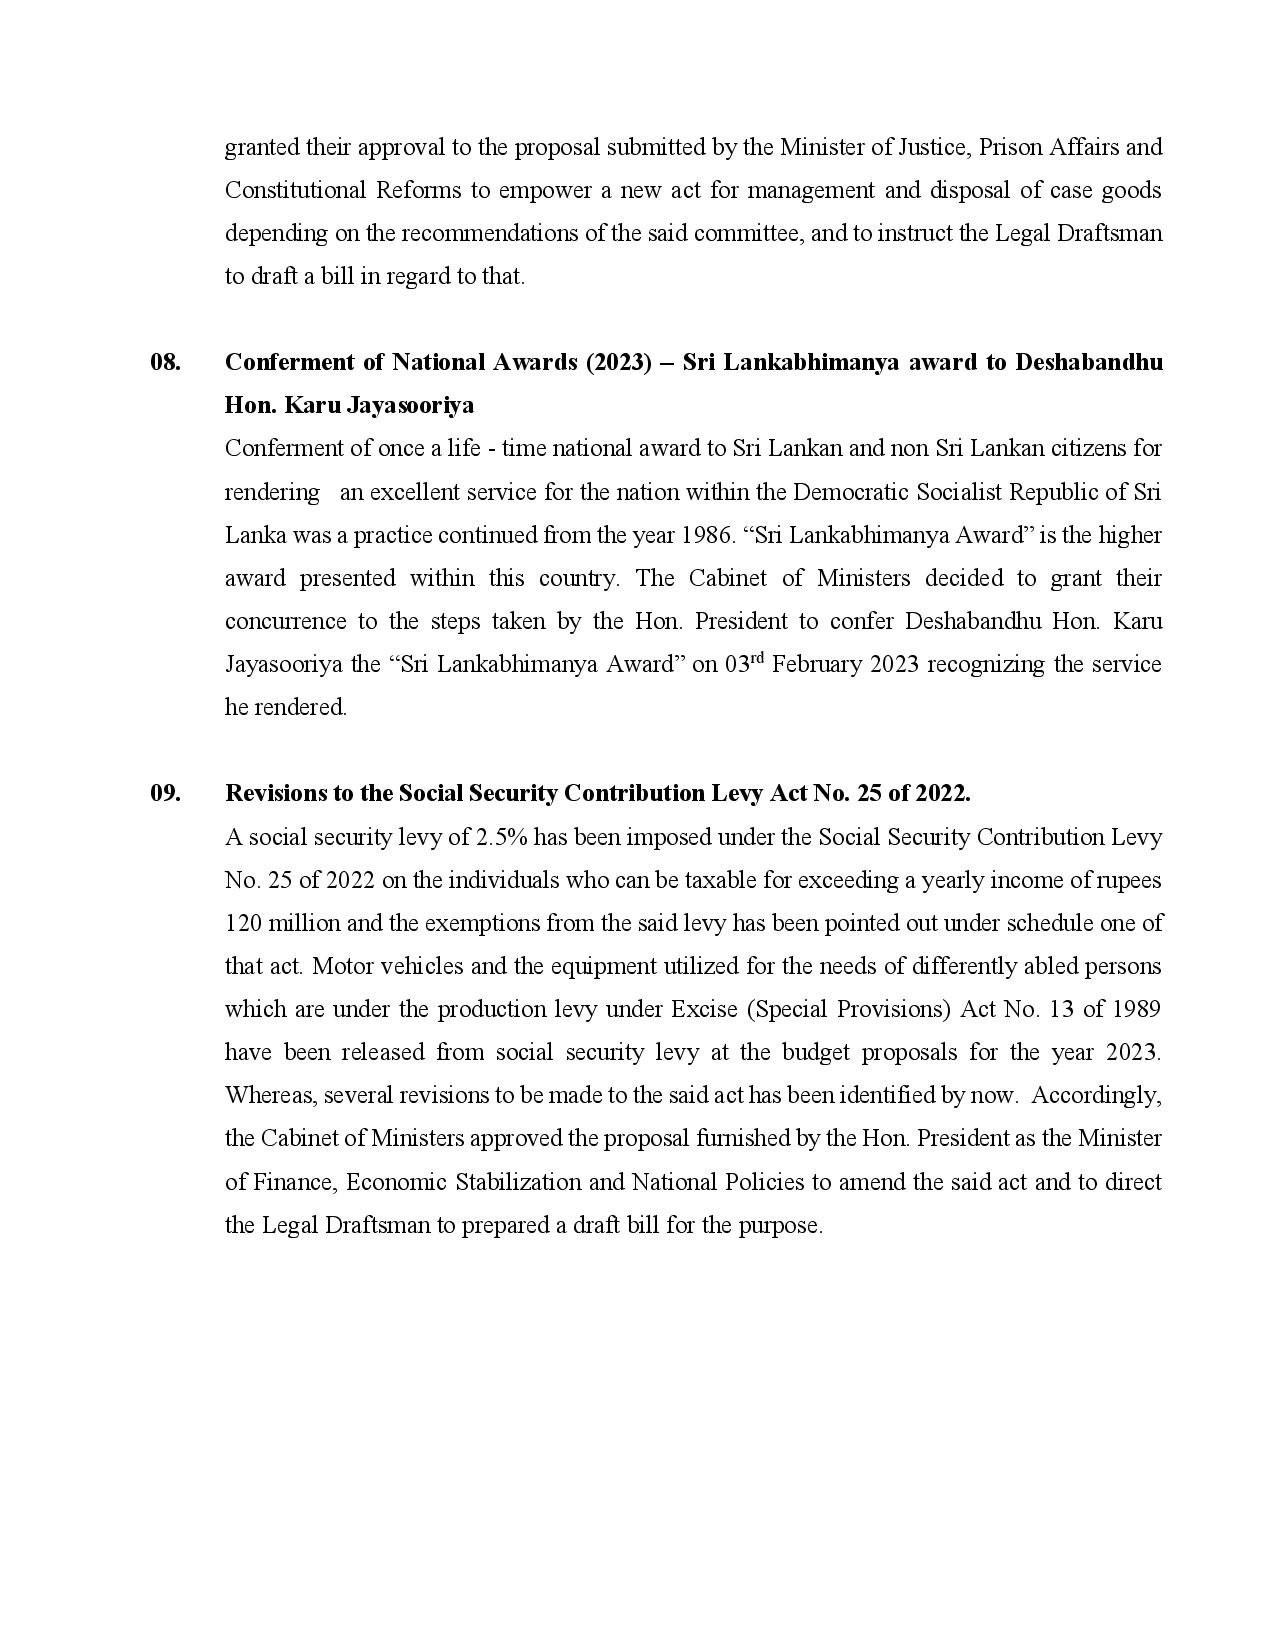 Cabinet Decision on 30.01.2023 English page 003